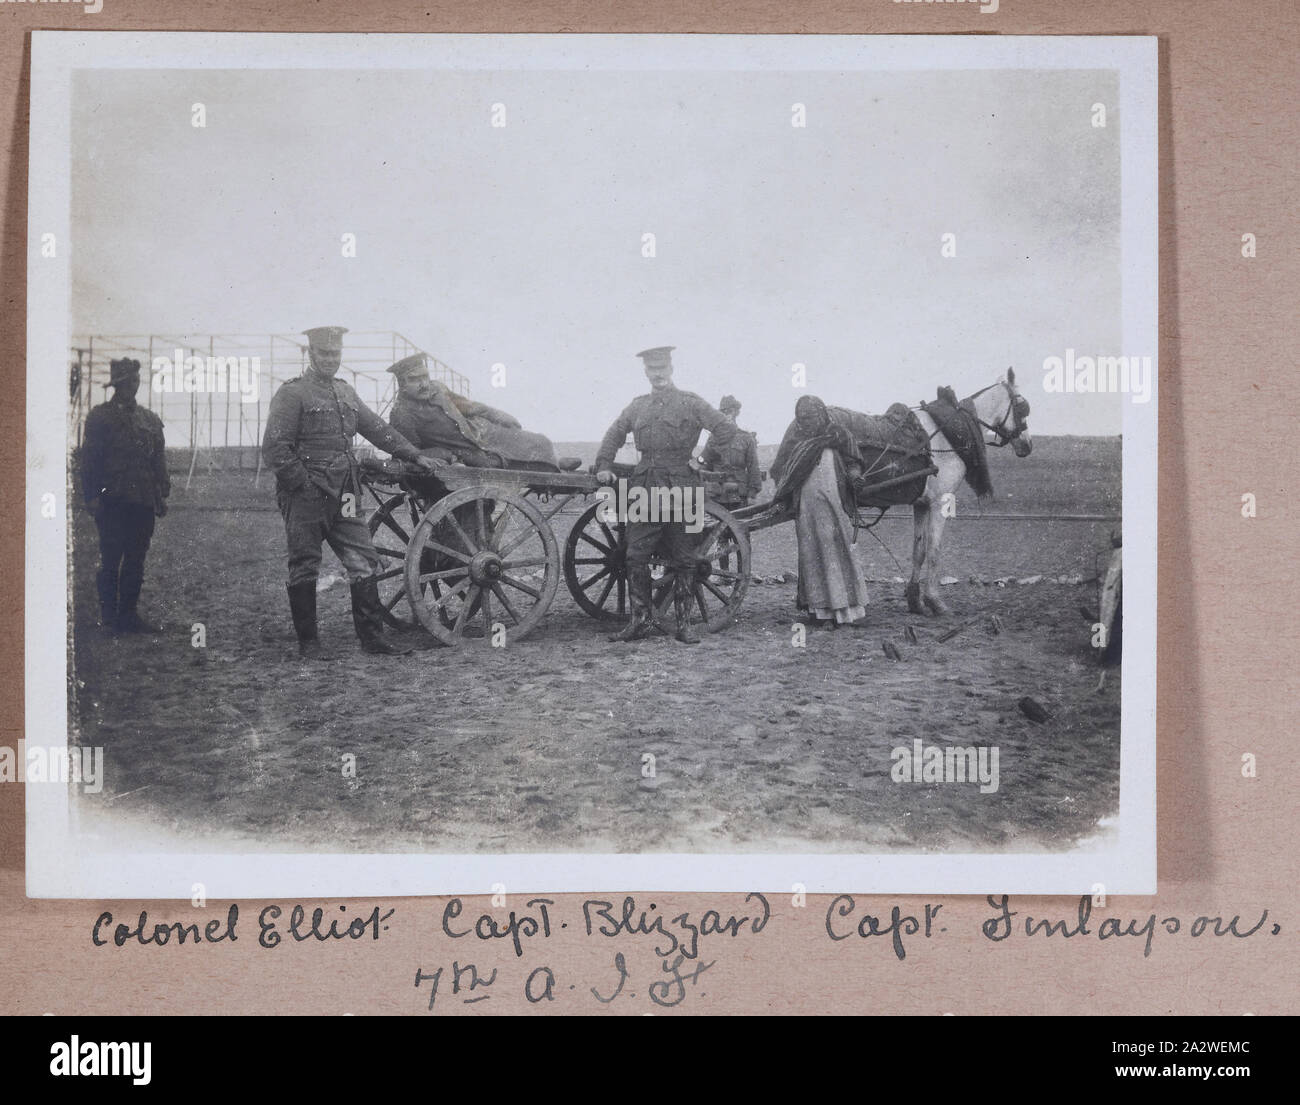 Photograph - 'Colonel Elliott, Capt. Blizzard, Capt. Finlayson, 7th A.I.F.', Egypt, Captain Edward Albert McKenna Album, World War I, 1914-1915, One of 139 photographs in an album from World War I likely to have been taken by Captain Edward Albert McKenna. The photographs include the 7th Battalion training in Mena Camp, Egypt, and sight-seeing. Image depicting Colonel Elliott and Captains Blizzard and Finlayson. Lieutenant-Colonel Harold Edward Pompey Elliott was the officer in charge of the 7th Battalion. By the end of the war Colonel Stock Photo